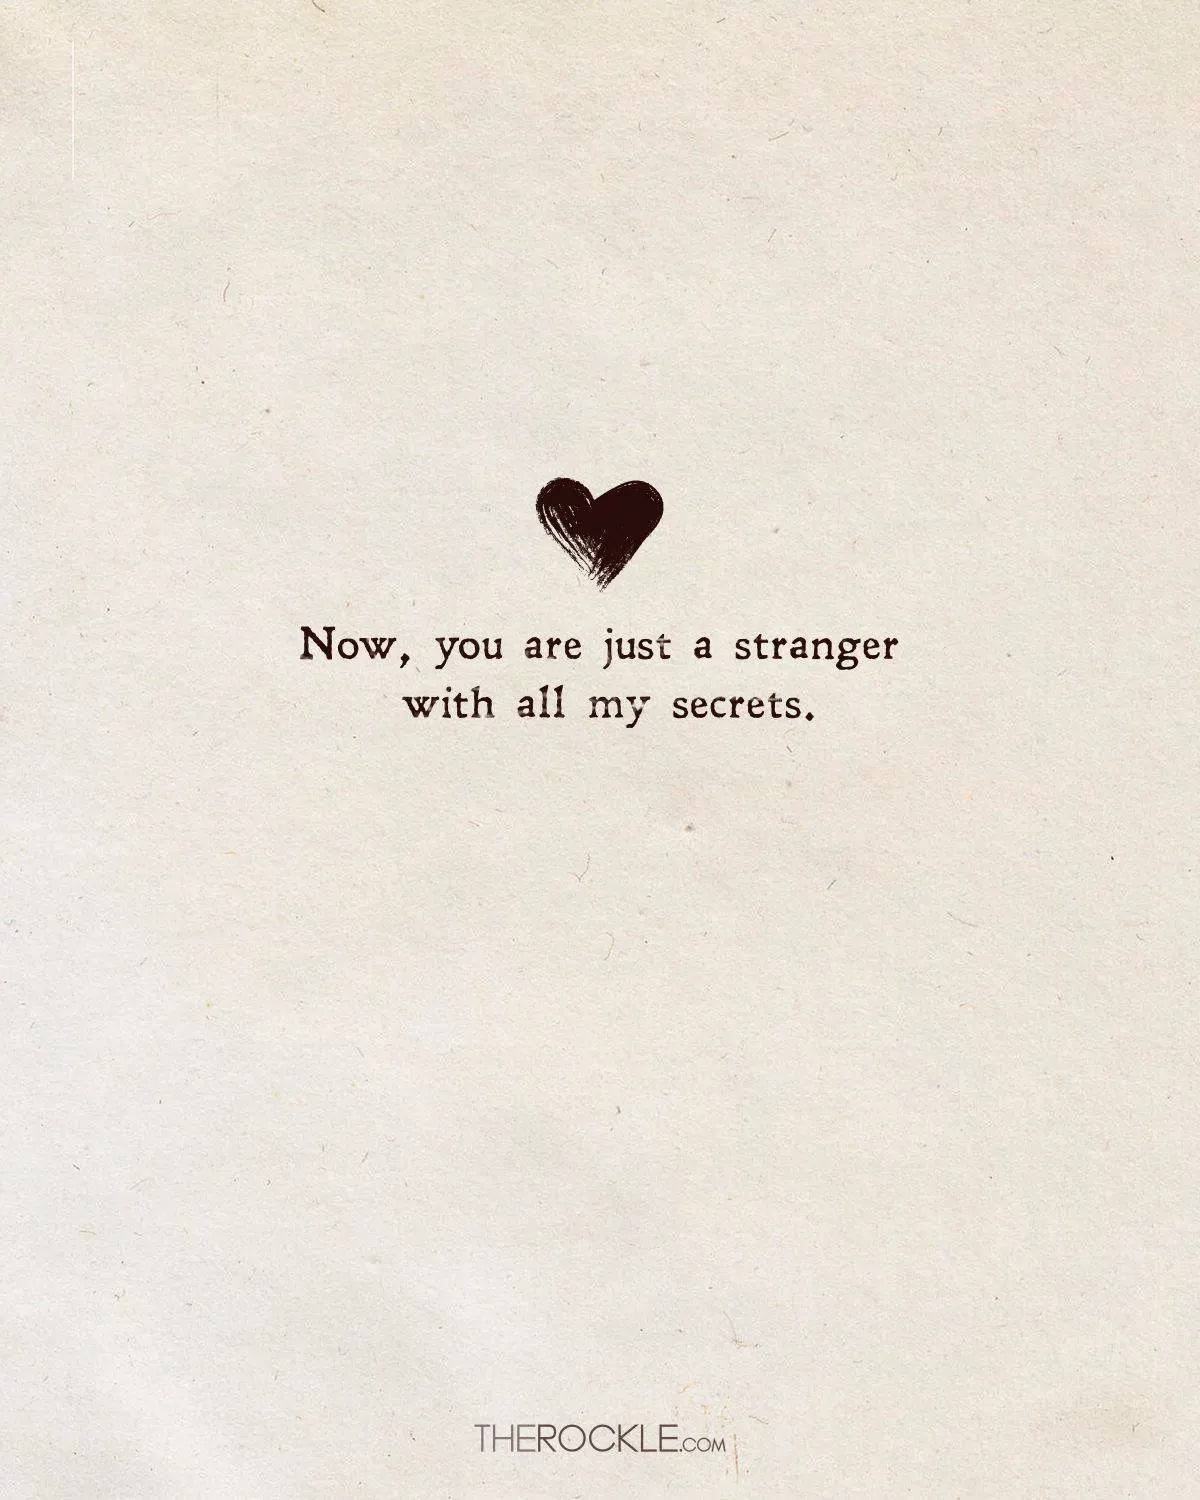 Sad quote about love: “Now, you are just a stranger with all my secrets.”